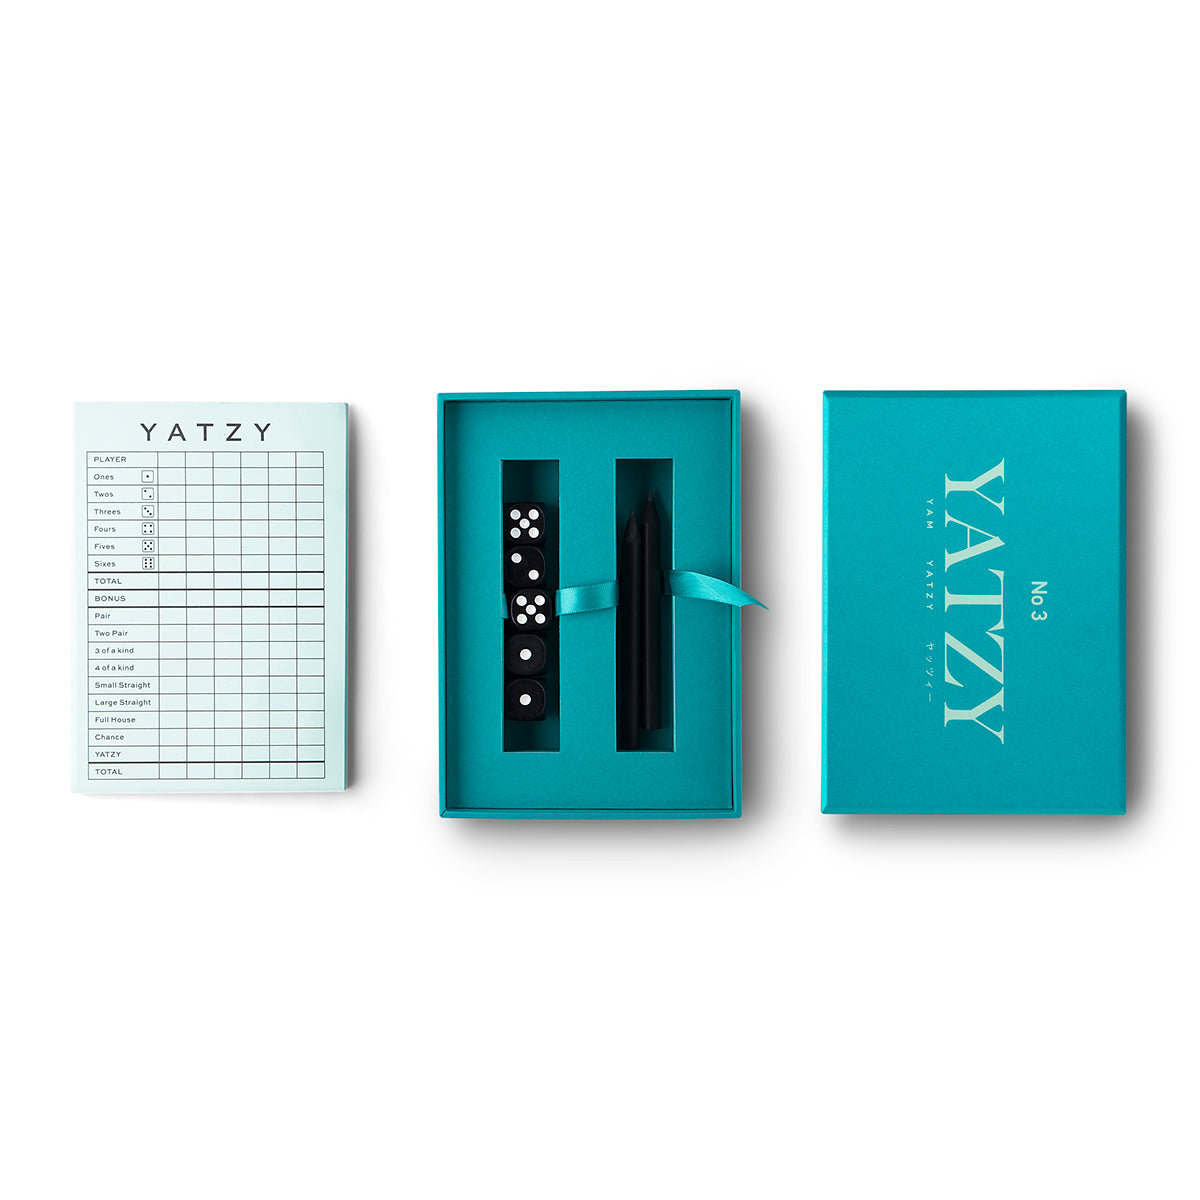 Enjoy a game of Yatzy with these stylish and minimal 5 black dice, 2 black wooden pencils and a 50-page scorecard. Printworks games are packaged in such beautifully designed boxes that they are perfect even just on display when not in use!